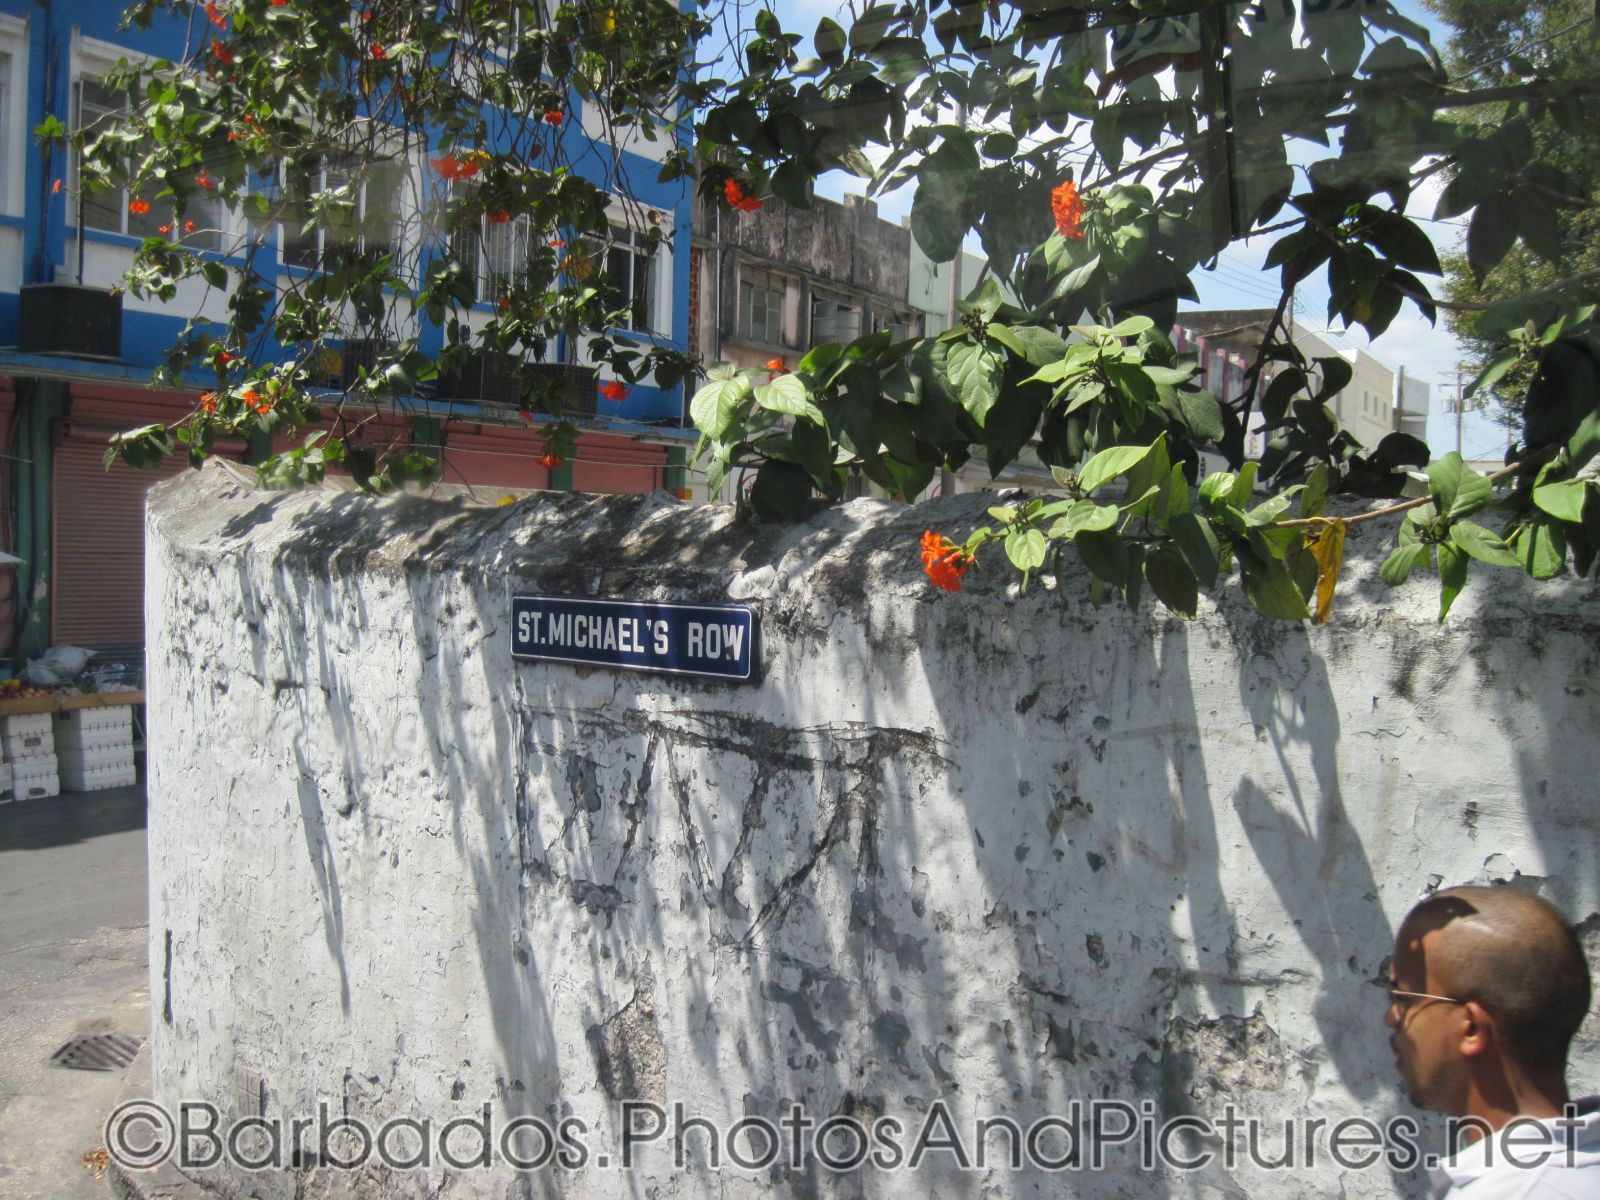 St Michael's Row in Barbados.jpg
